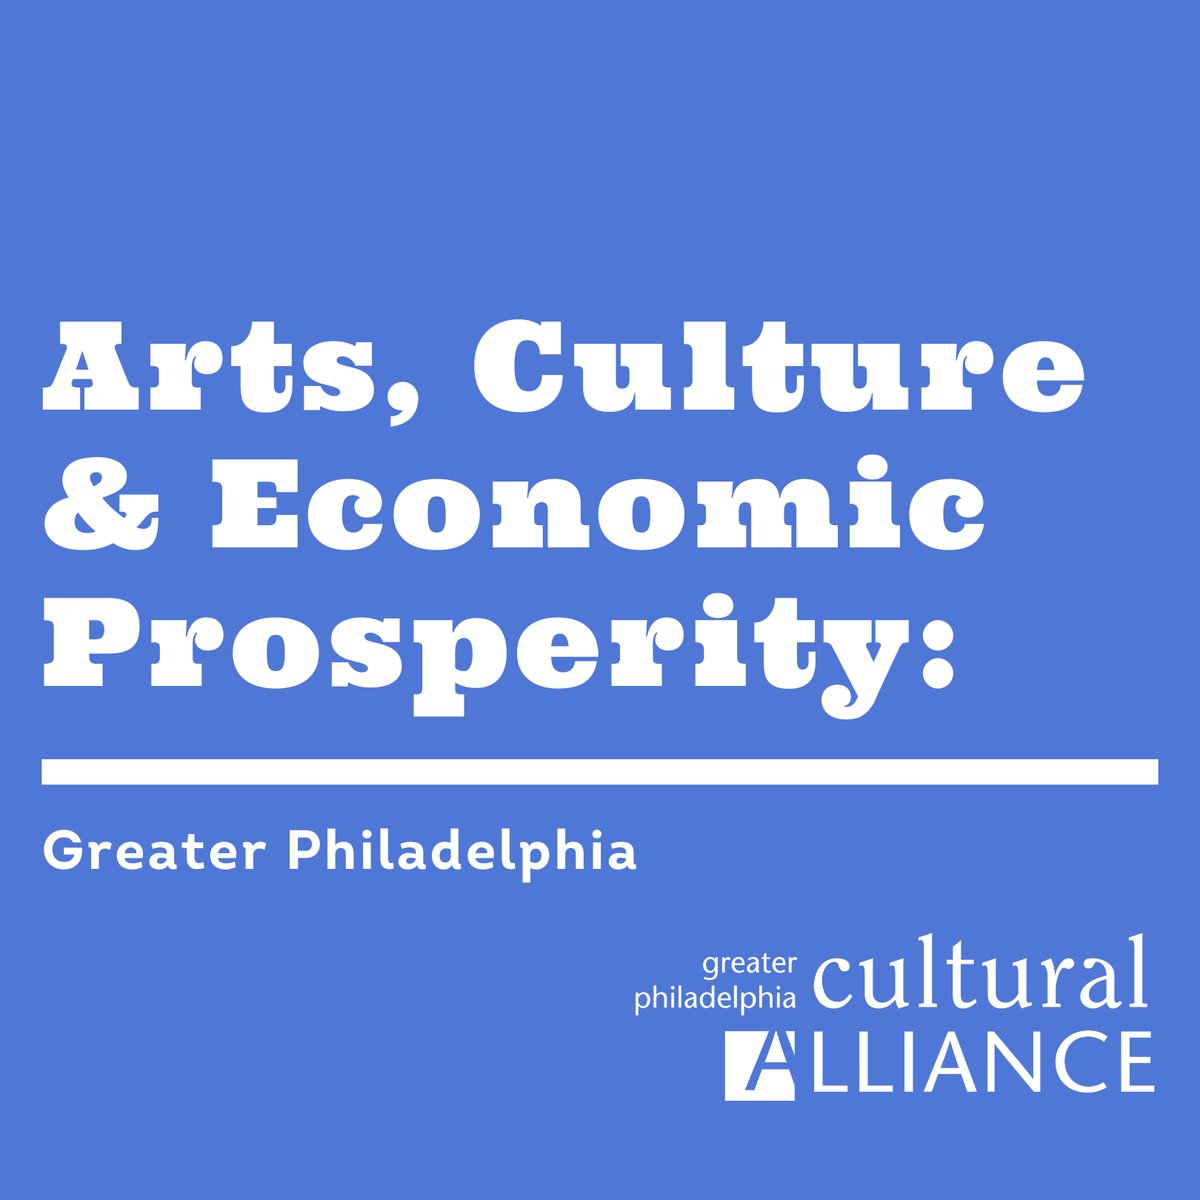 You can now see the full report: 'Arts, Culture & Economic Prosperity: Greater Philadelphia' LIVE on our website: philaculture.org/prosperity with @americans4arts and @PAHumanities